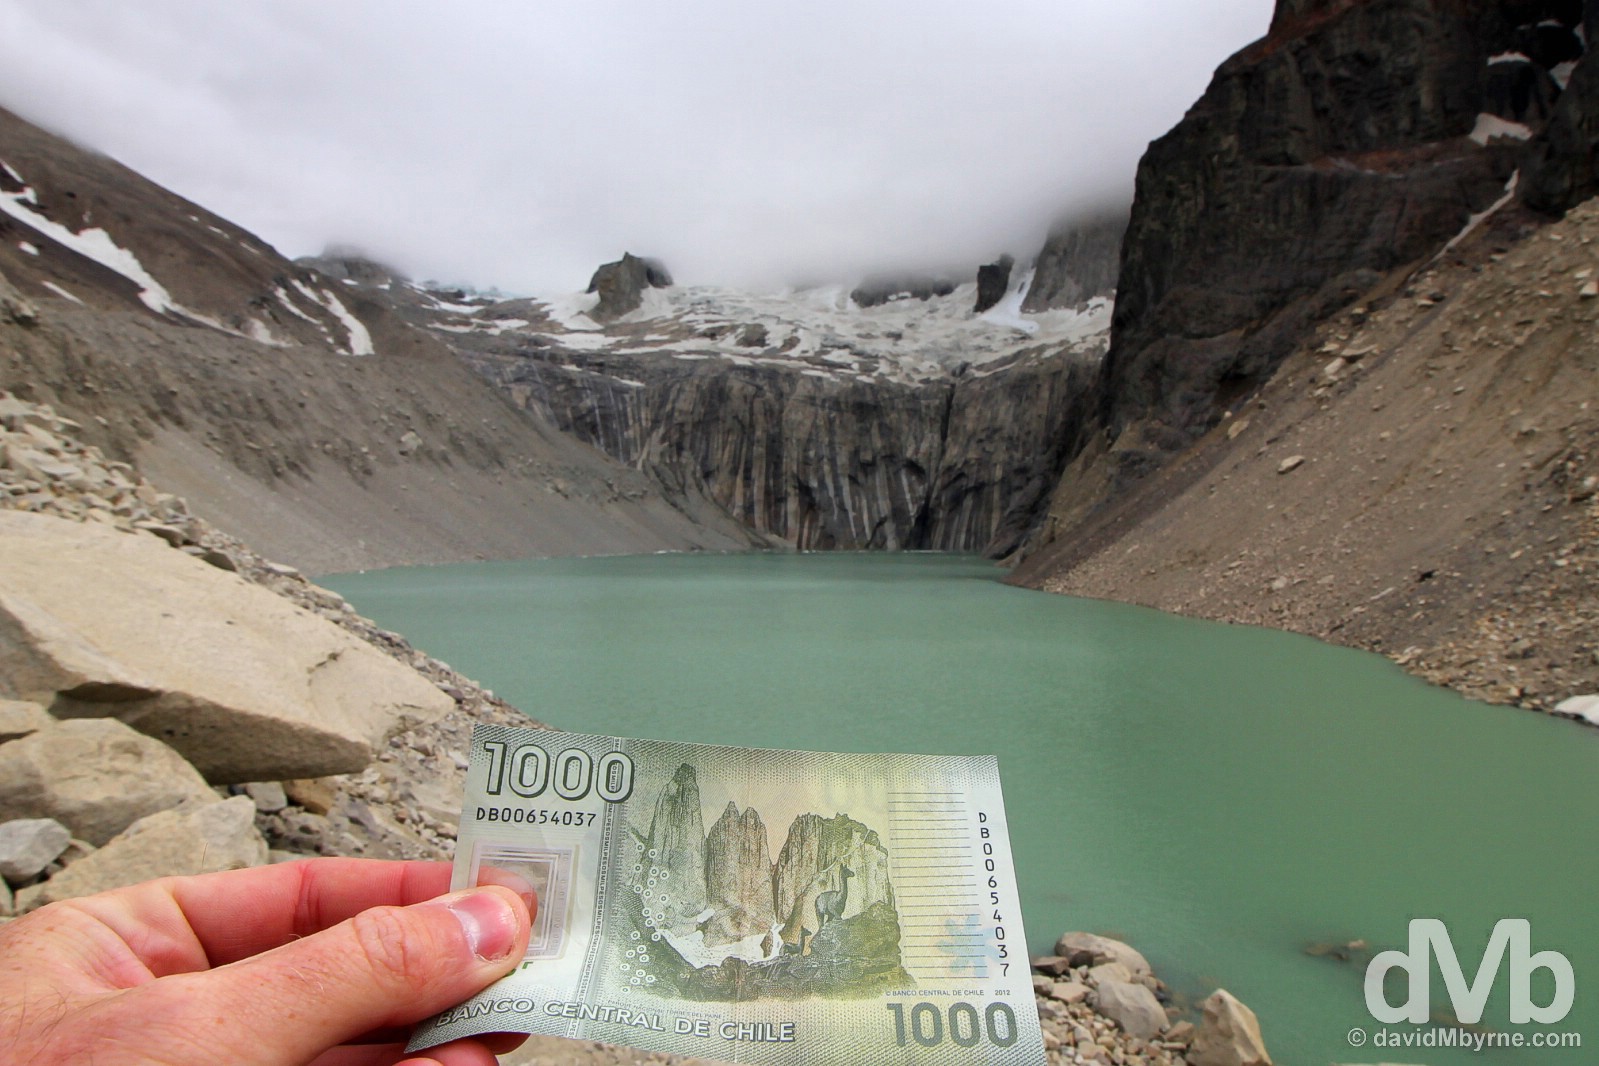 The missing pieces. The Torres del Paine peaks, shrouded by cloud on this day, as seen on the rear of the Chilean 1000 peso note on the edge of Laguna Torre in Parque Nacional Torres Del Paine, southern Patagonia, Chile. November 7, 2015. 